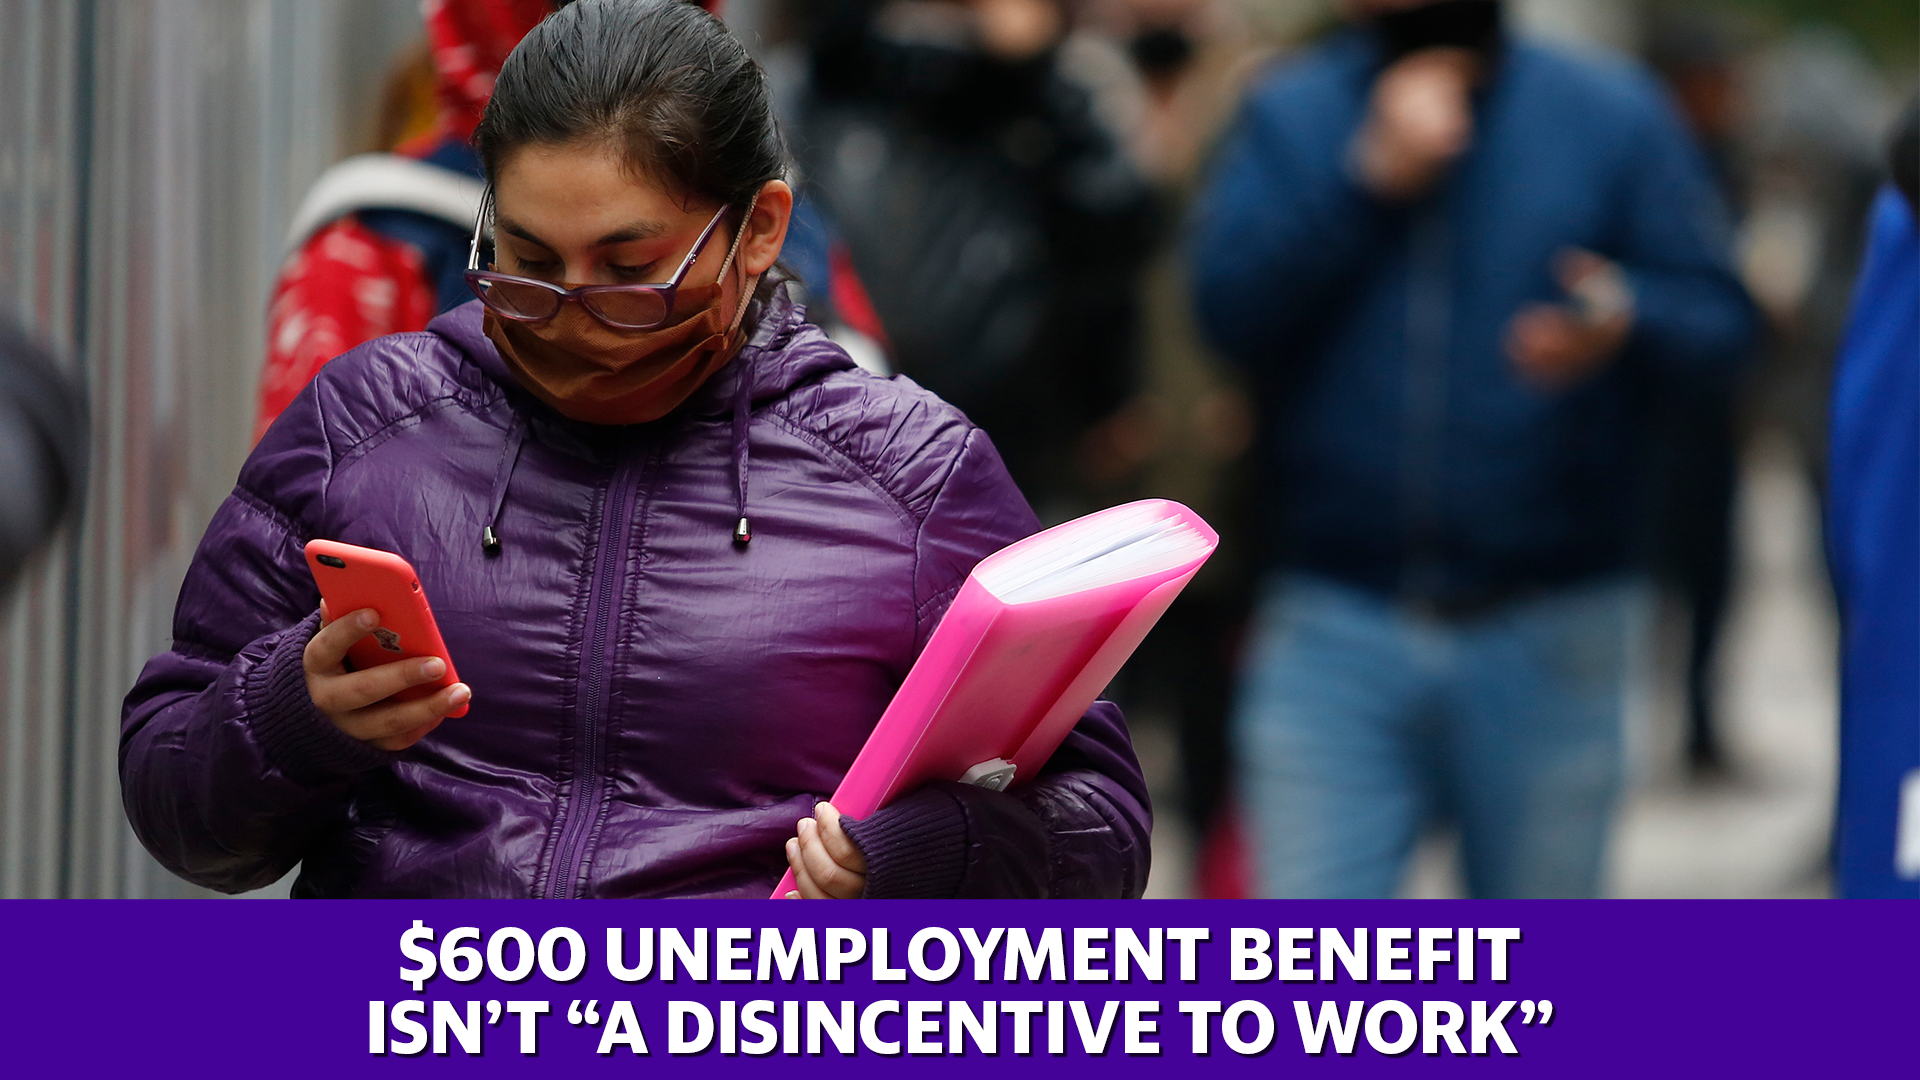 Analysis: $600 unemployment benefit isn’t “a disincentive to work” [Video]